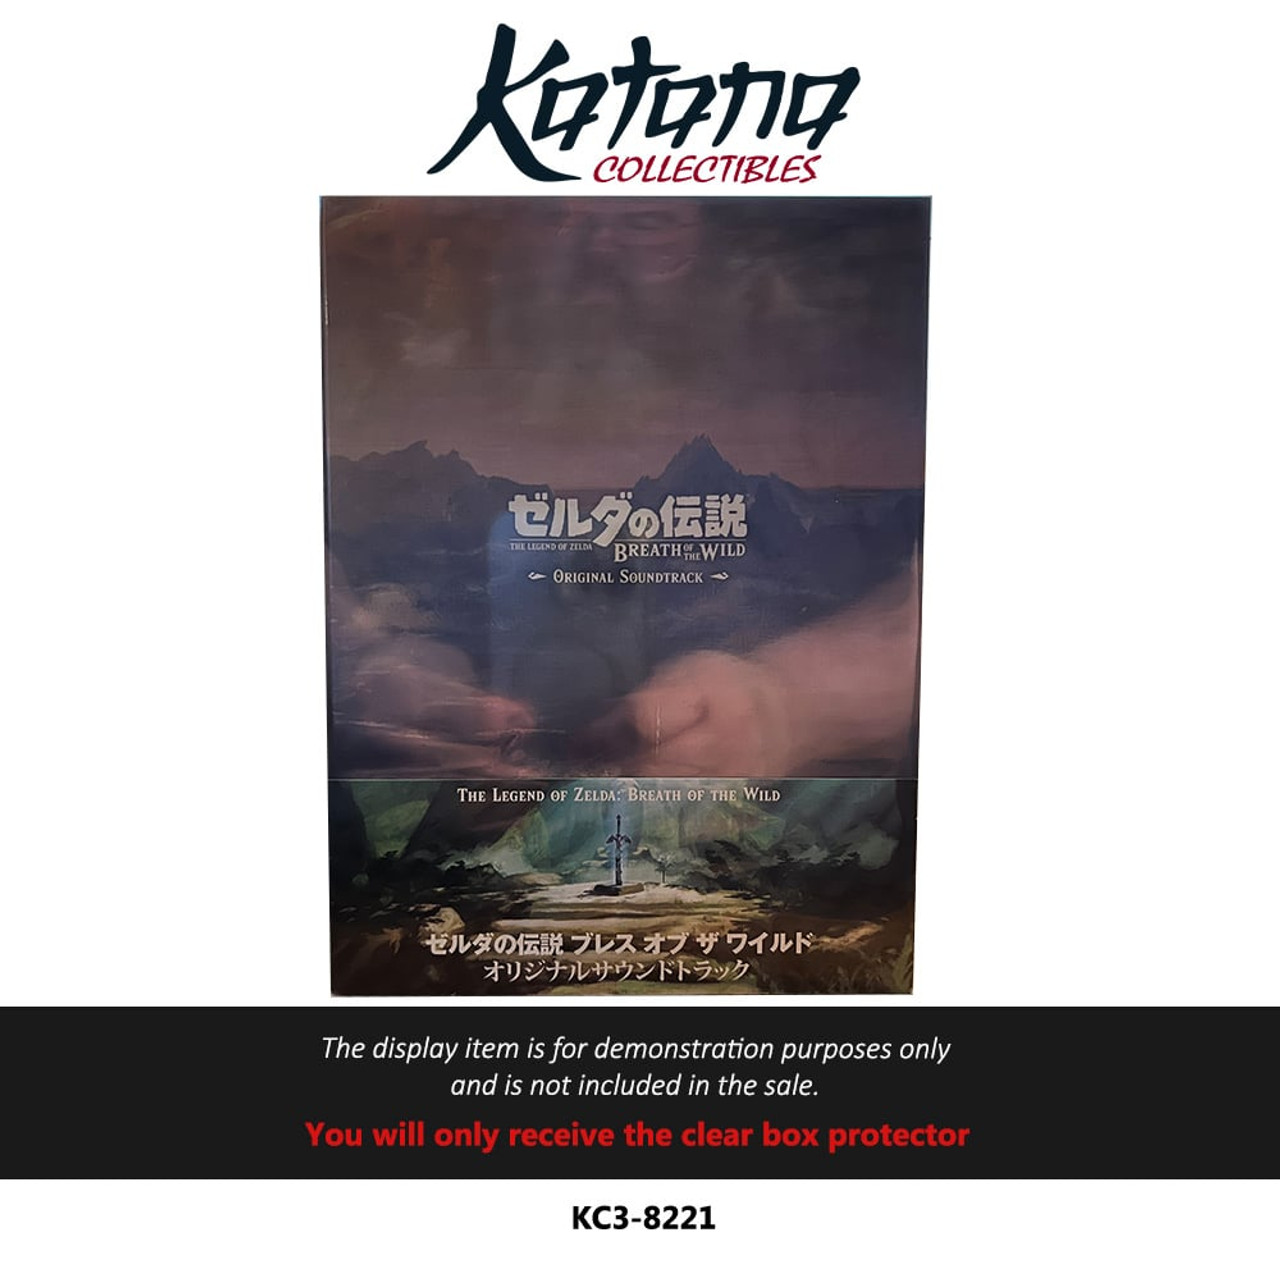 Katana Collectibles Protector For The Legend of Zelda: Breath Of The Wild Original Soundtrack CD Box Set